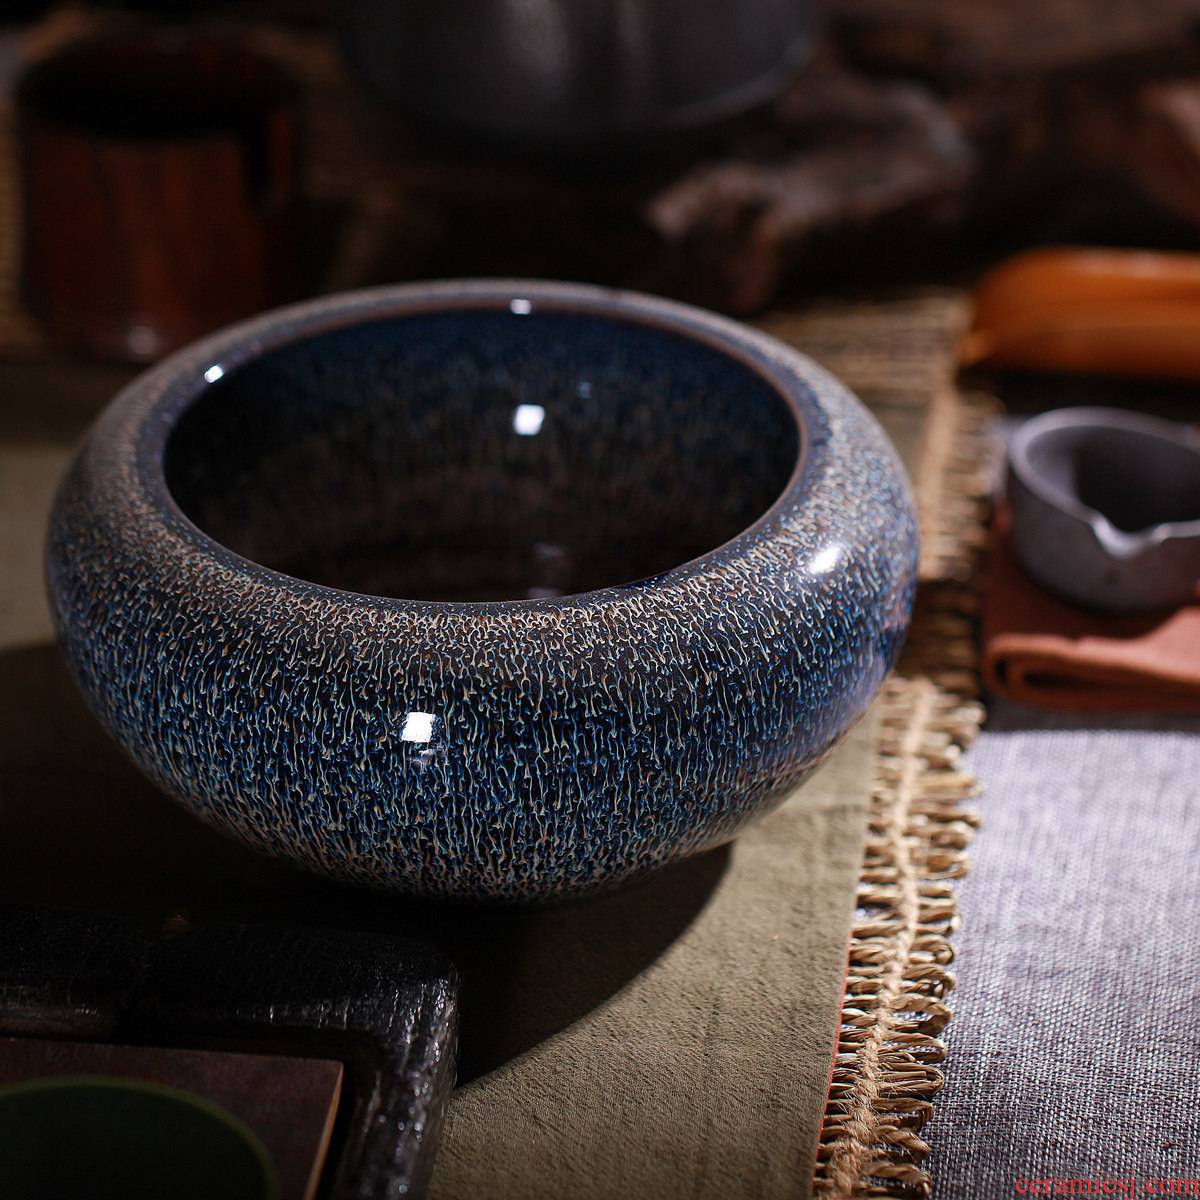 One thousand fire tea tea to wash large manual jingdezhen ceramic household variable writing brush washer tea accessories water restoring ancient ways